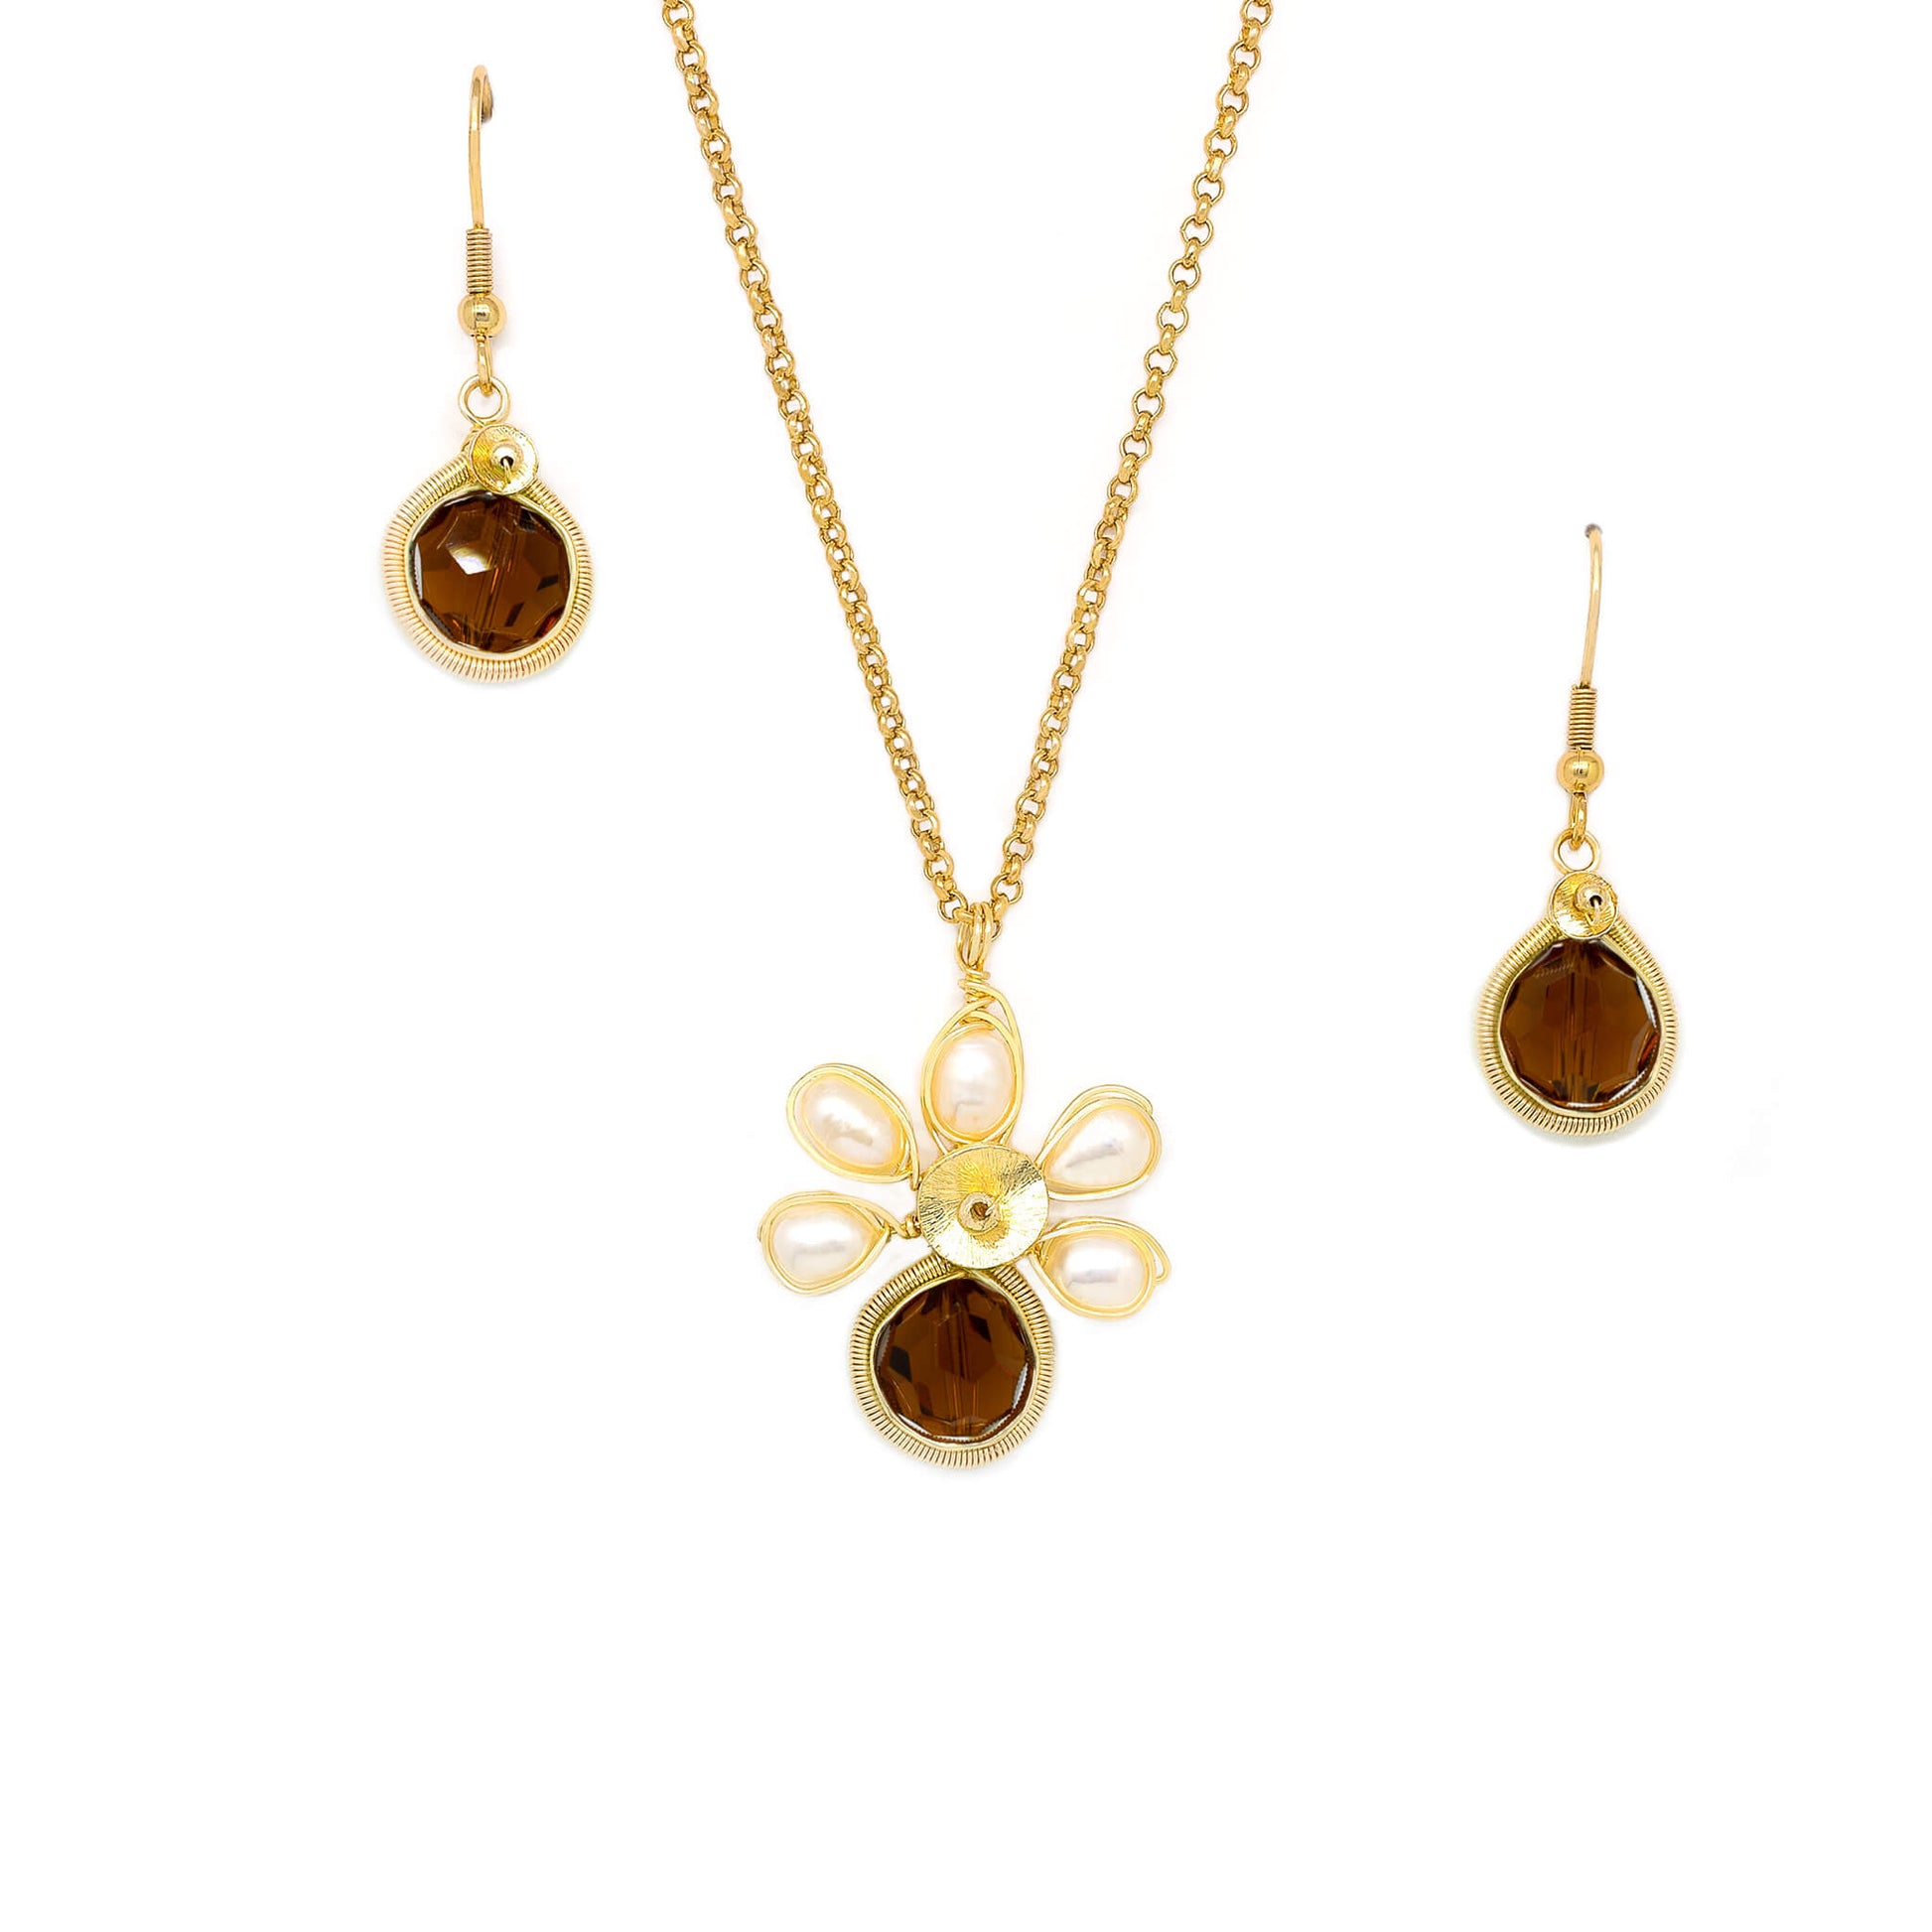 November Birthstone Crystal Necklace.-Earrings Set. Brown Crystals, Fresh Water Pearls  and Gold Set. 22K Gold Plated Chain. 